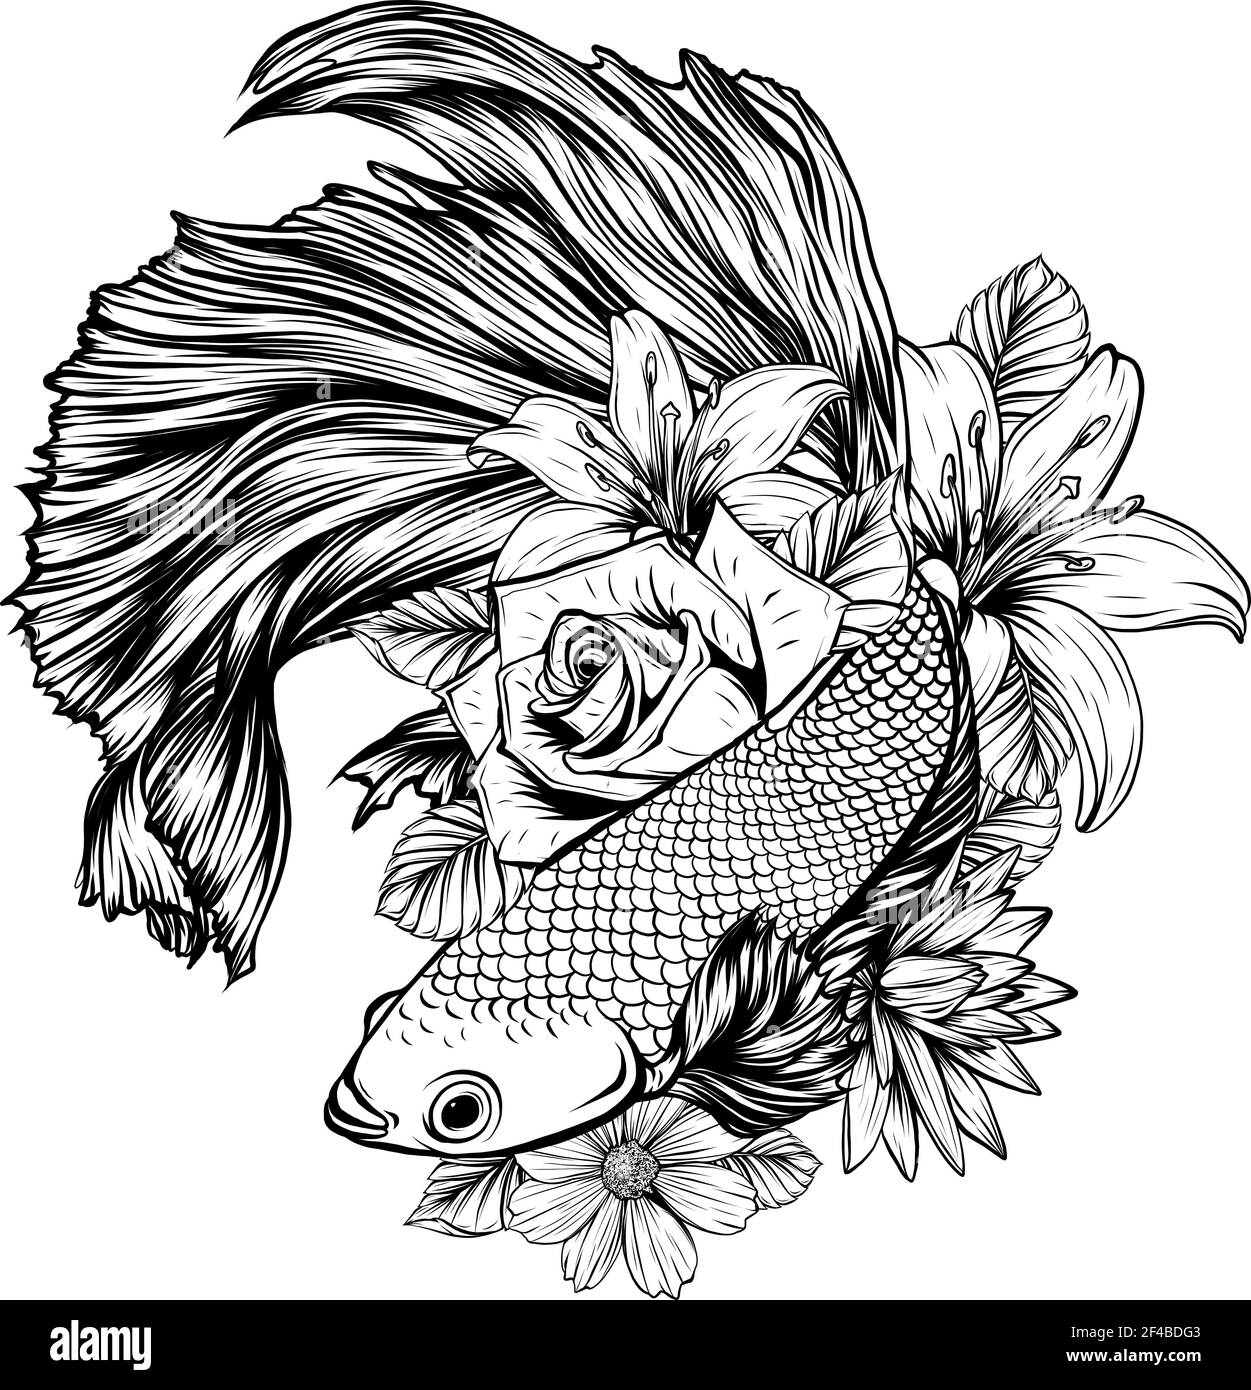 draw in black and white of fish betta splendens with flowers vector illustration Stock Vector